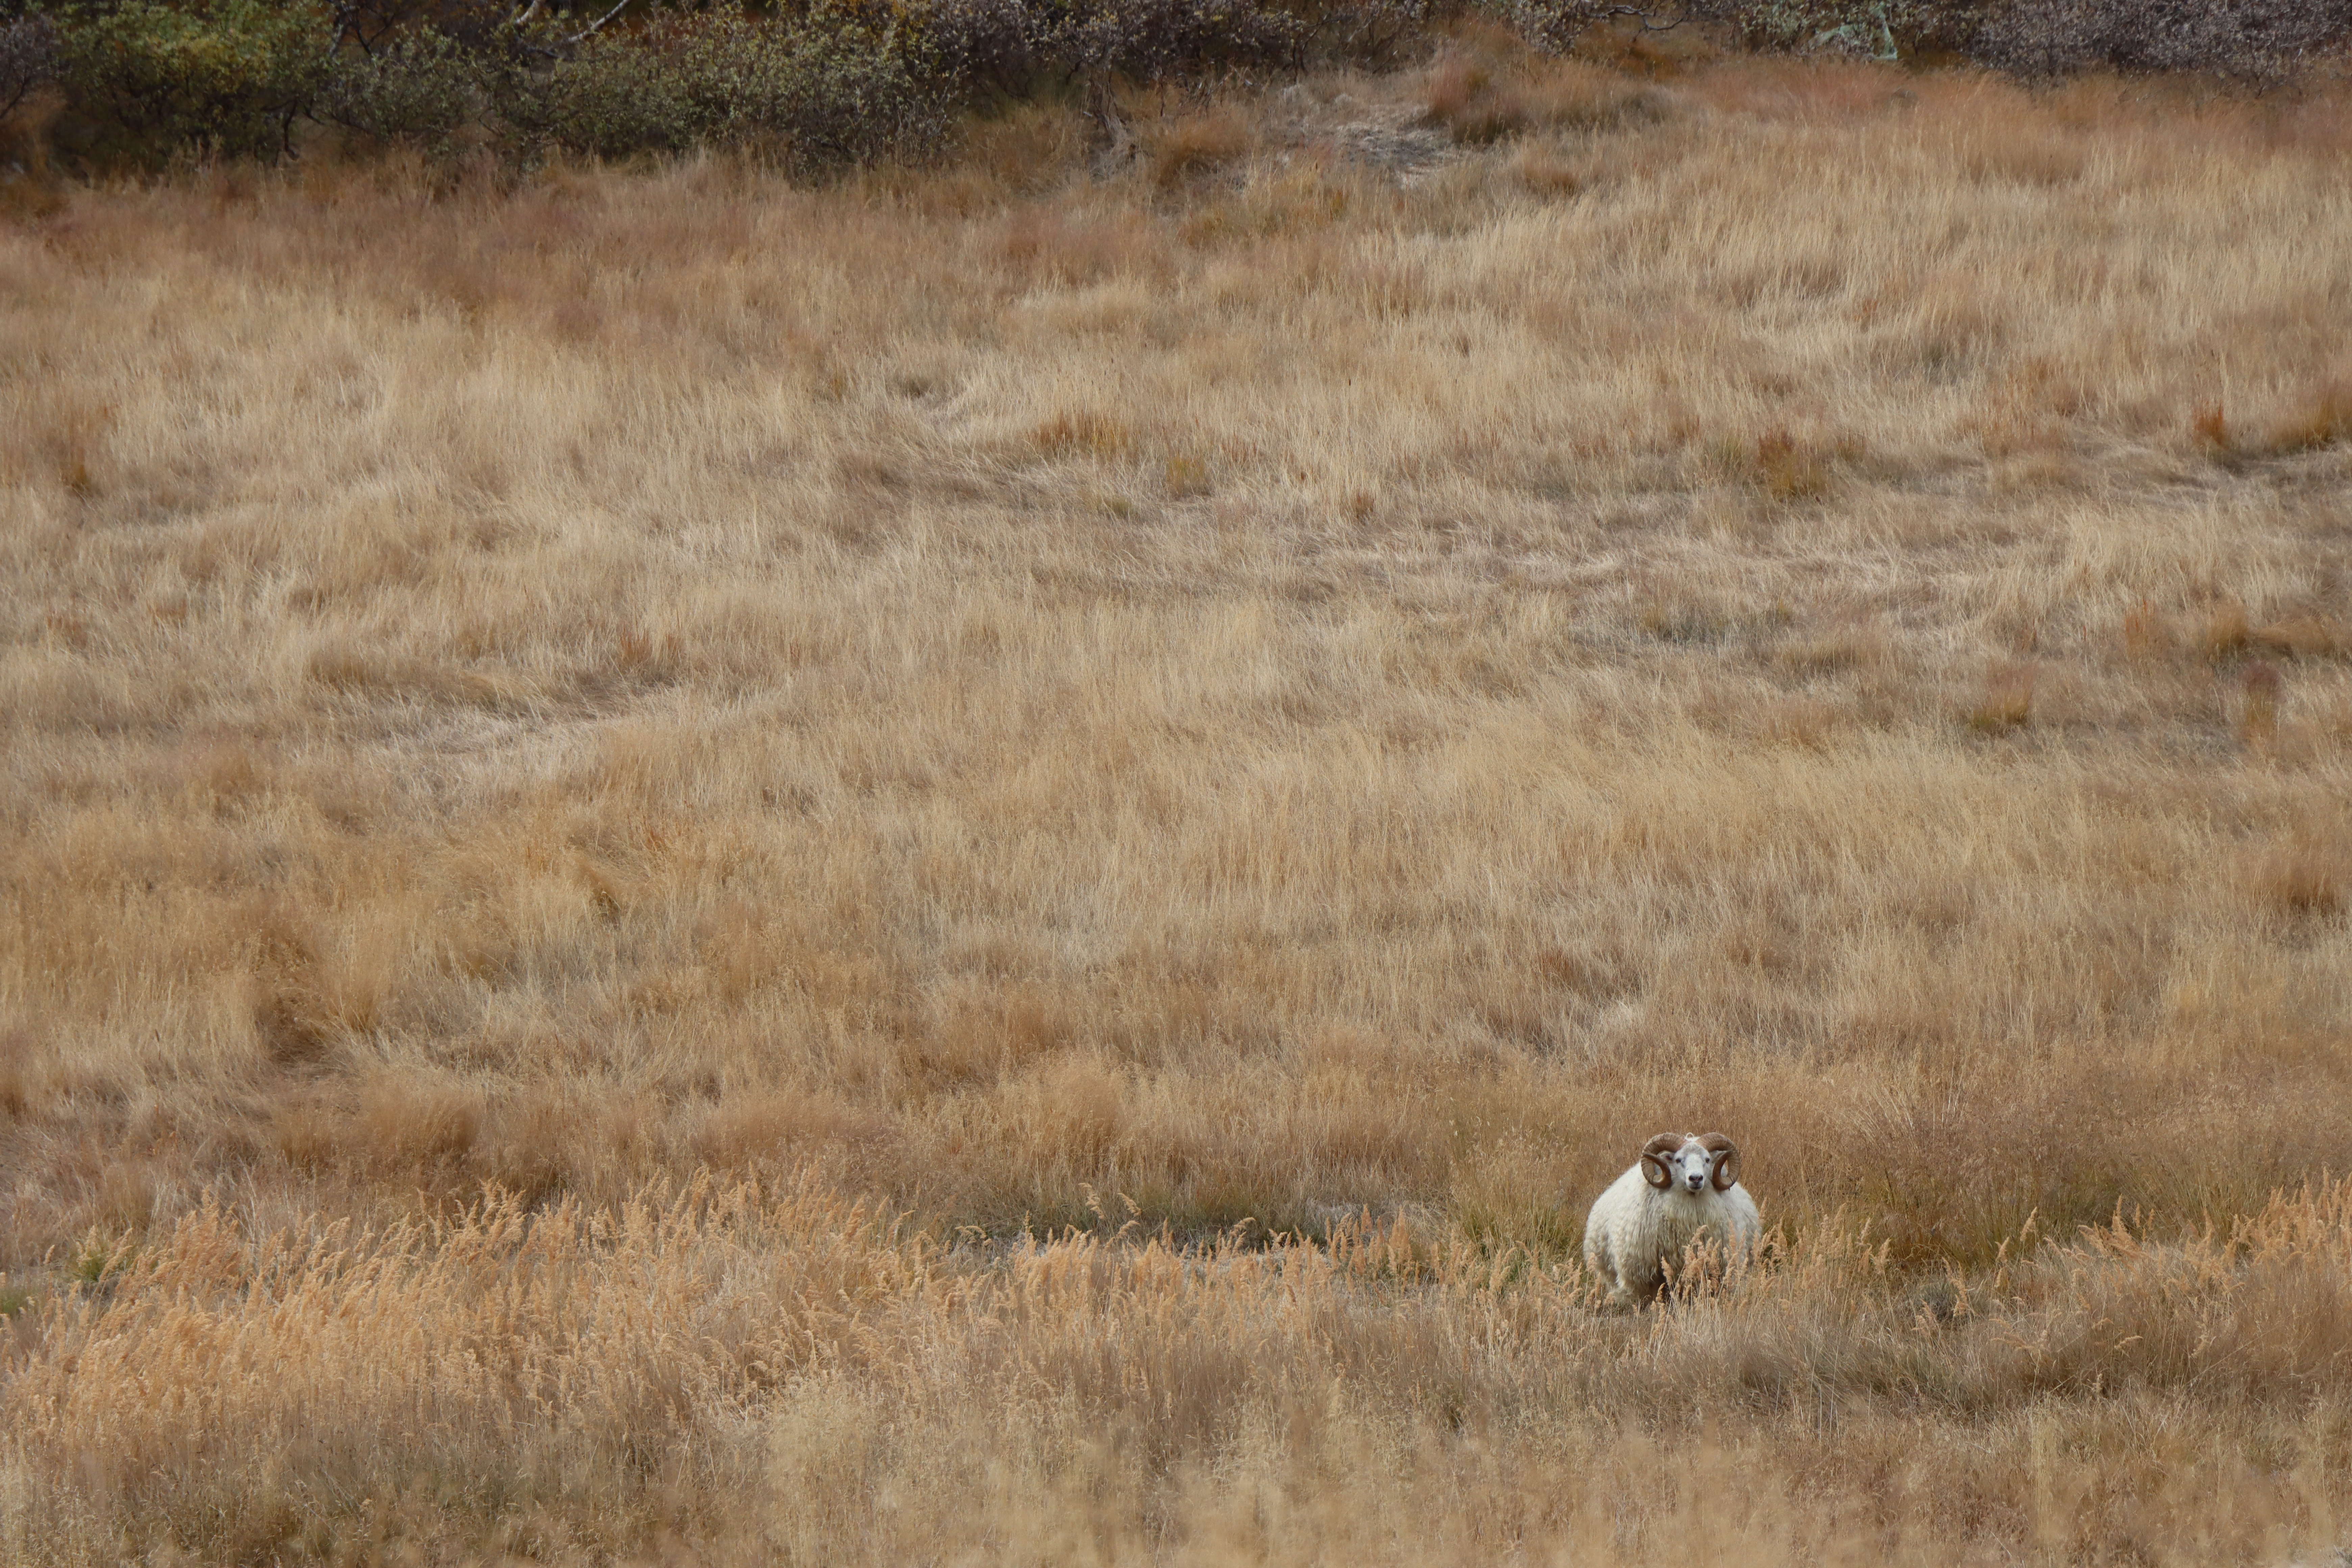 A lone sheep stands on a field of tall, brown grass.